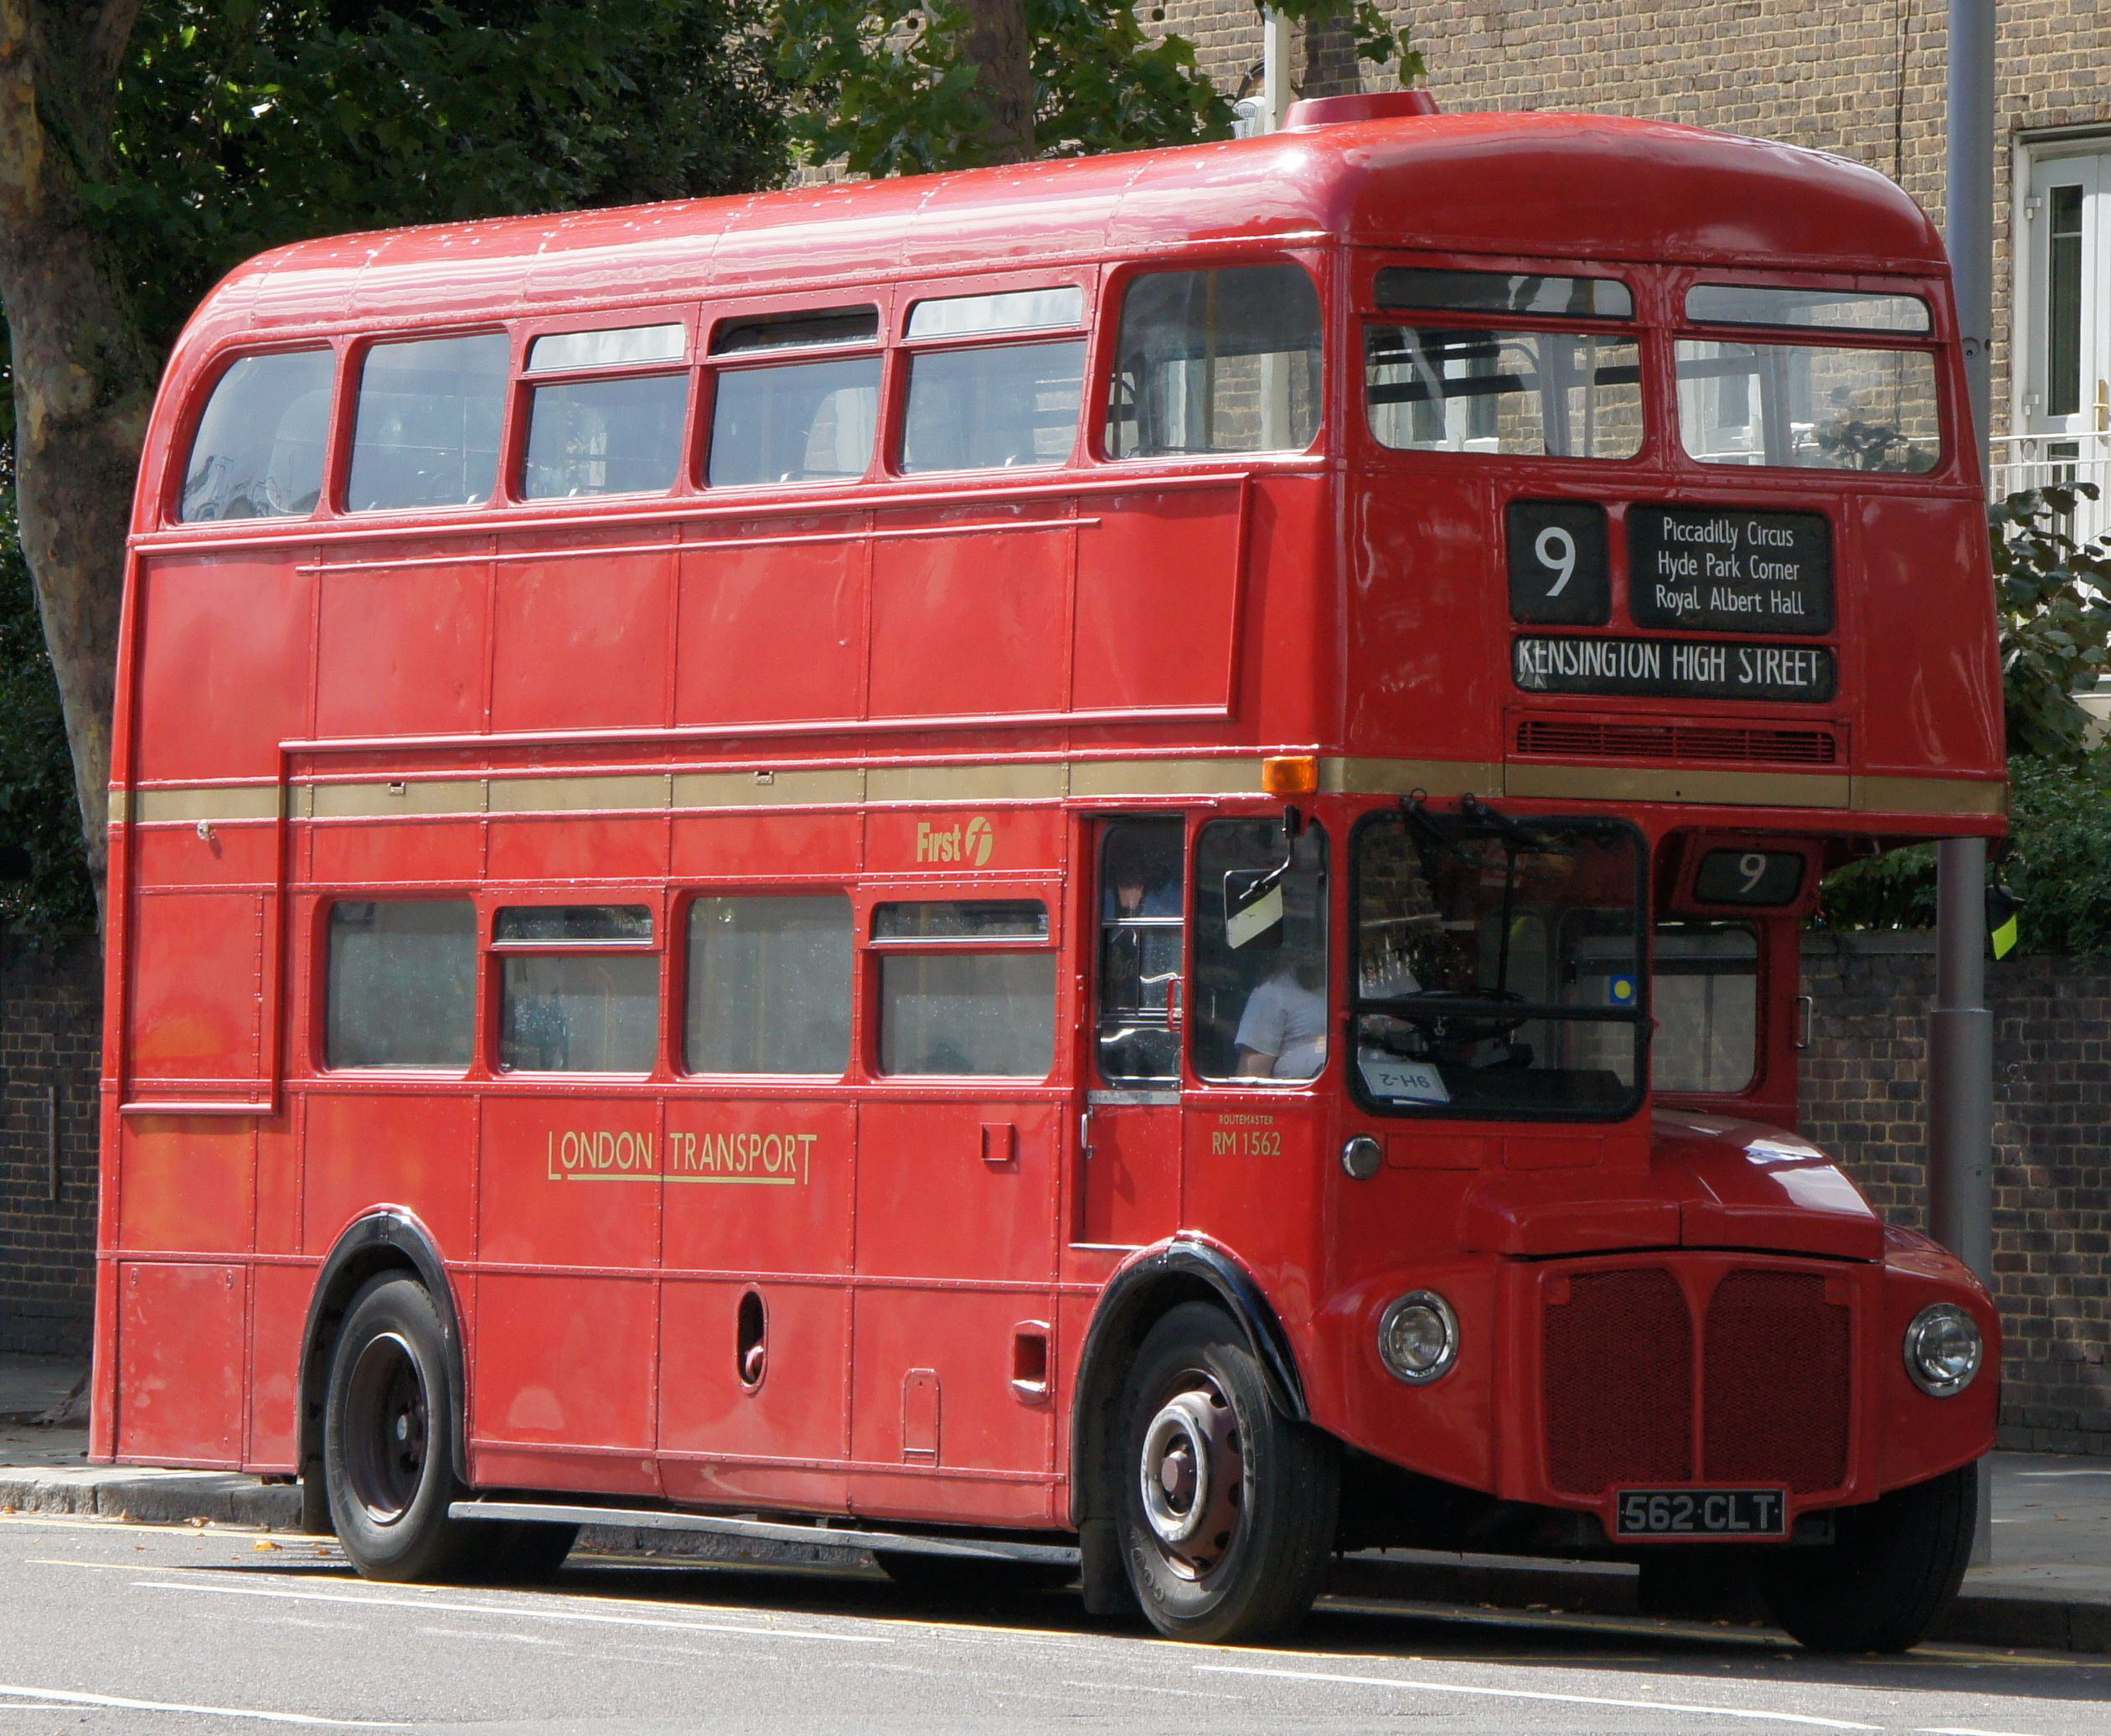 Аутобуси First_London_Routemaster_bus_RM1562_(562_CLT),_heritage_route_9,_Kensington_High_Street,_27_August_2011_(1)